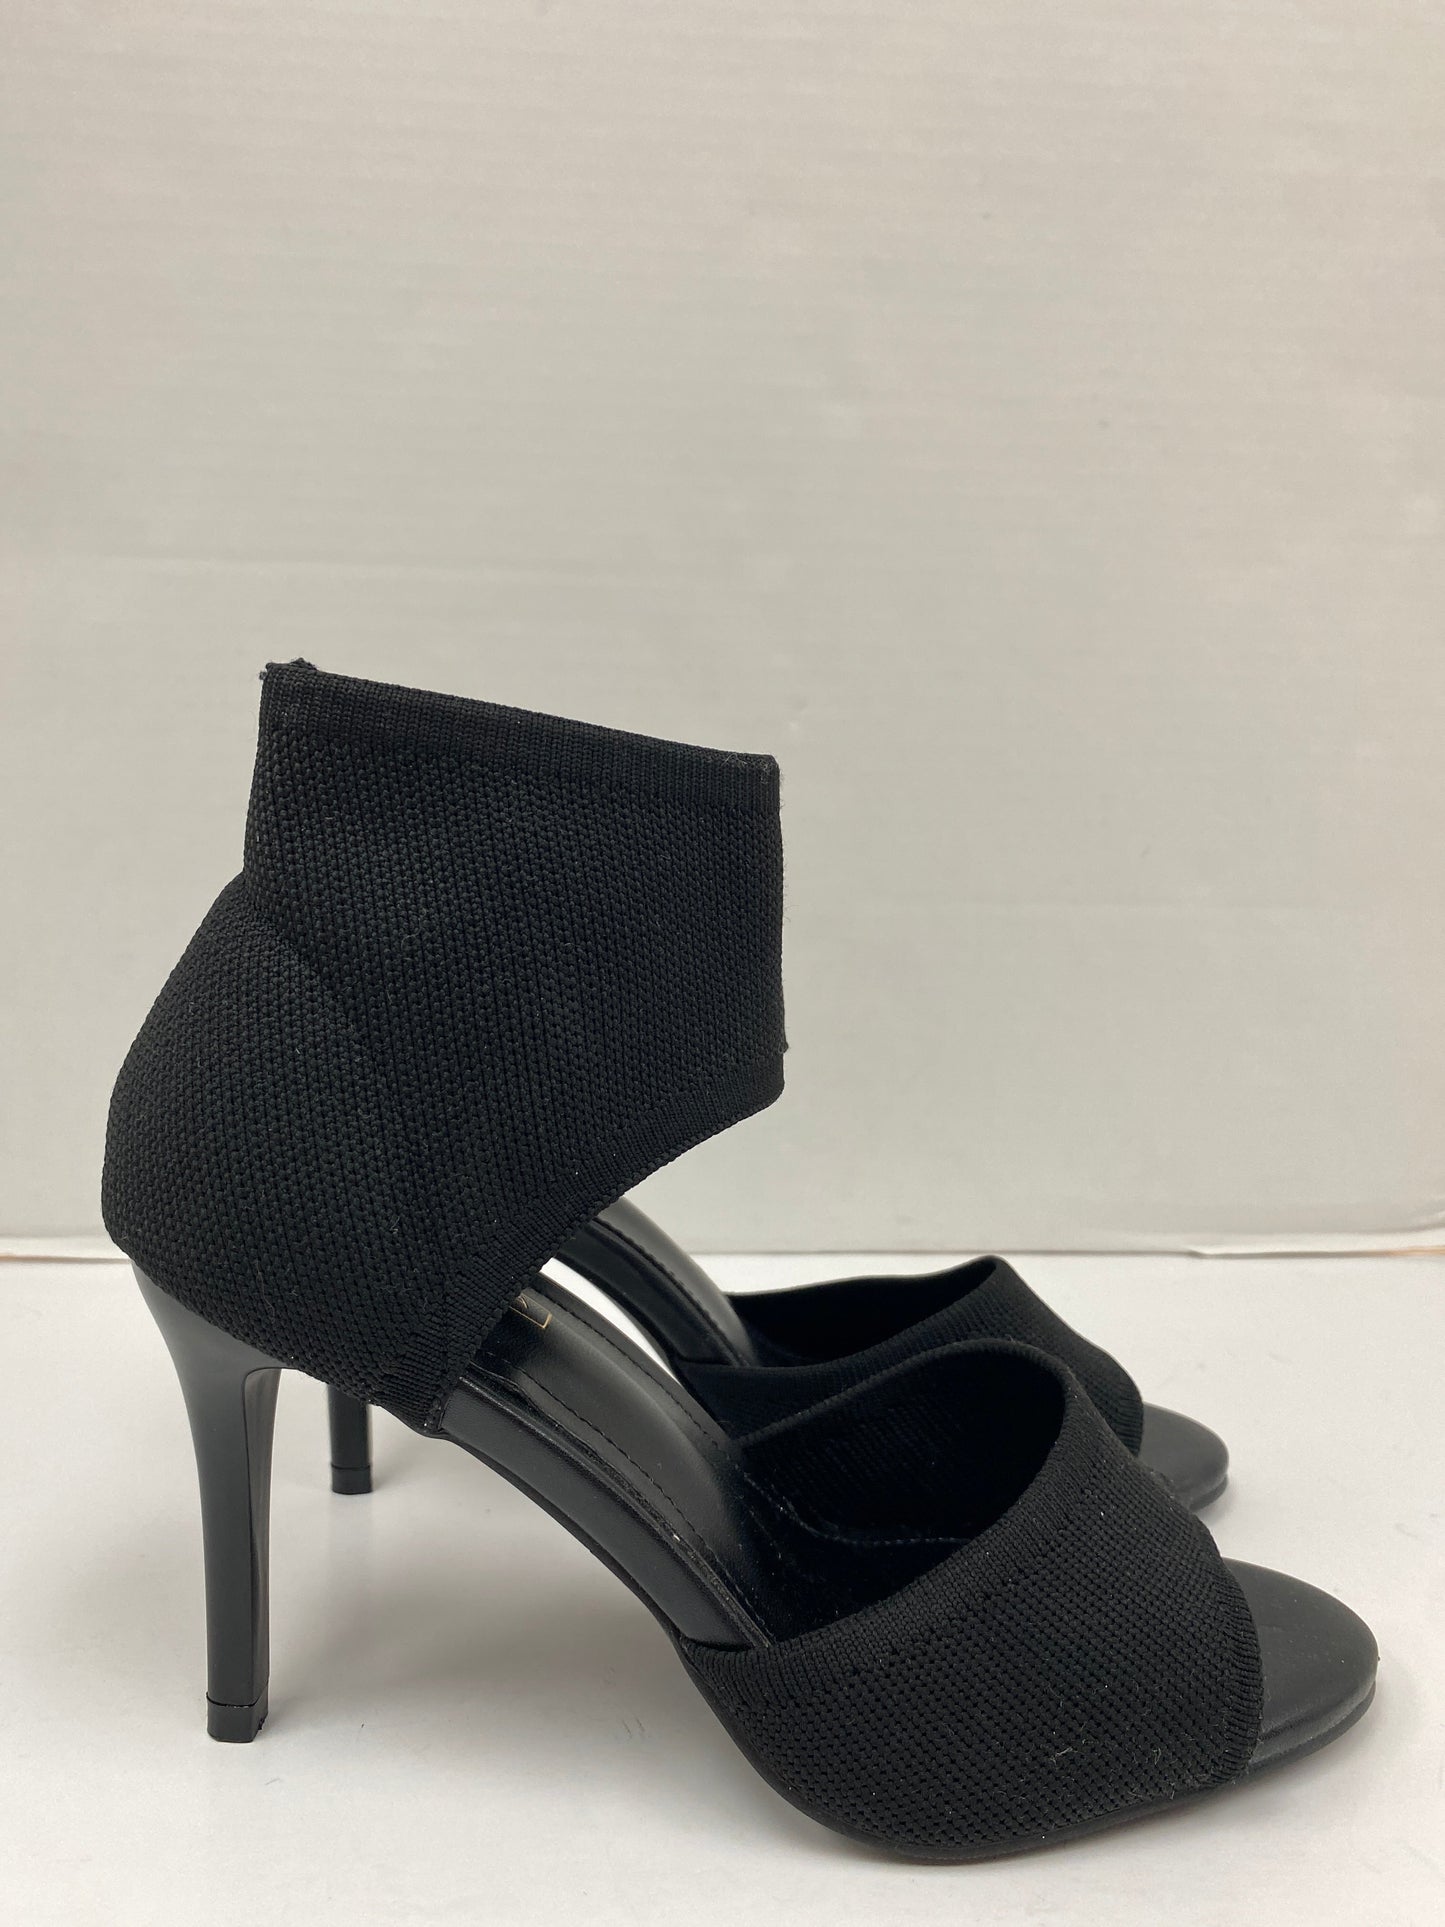 Shoes Heels Stiletto By Clothes Mentor  Size: 7